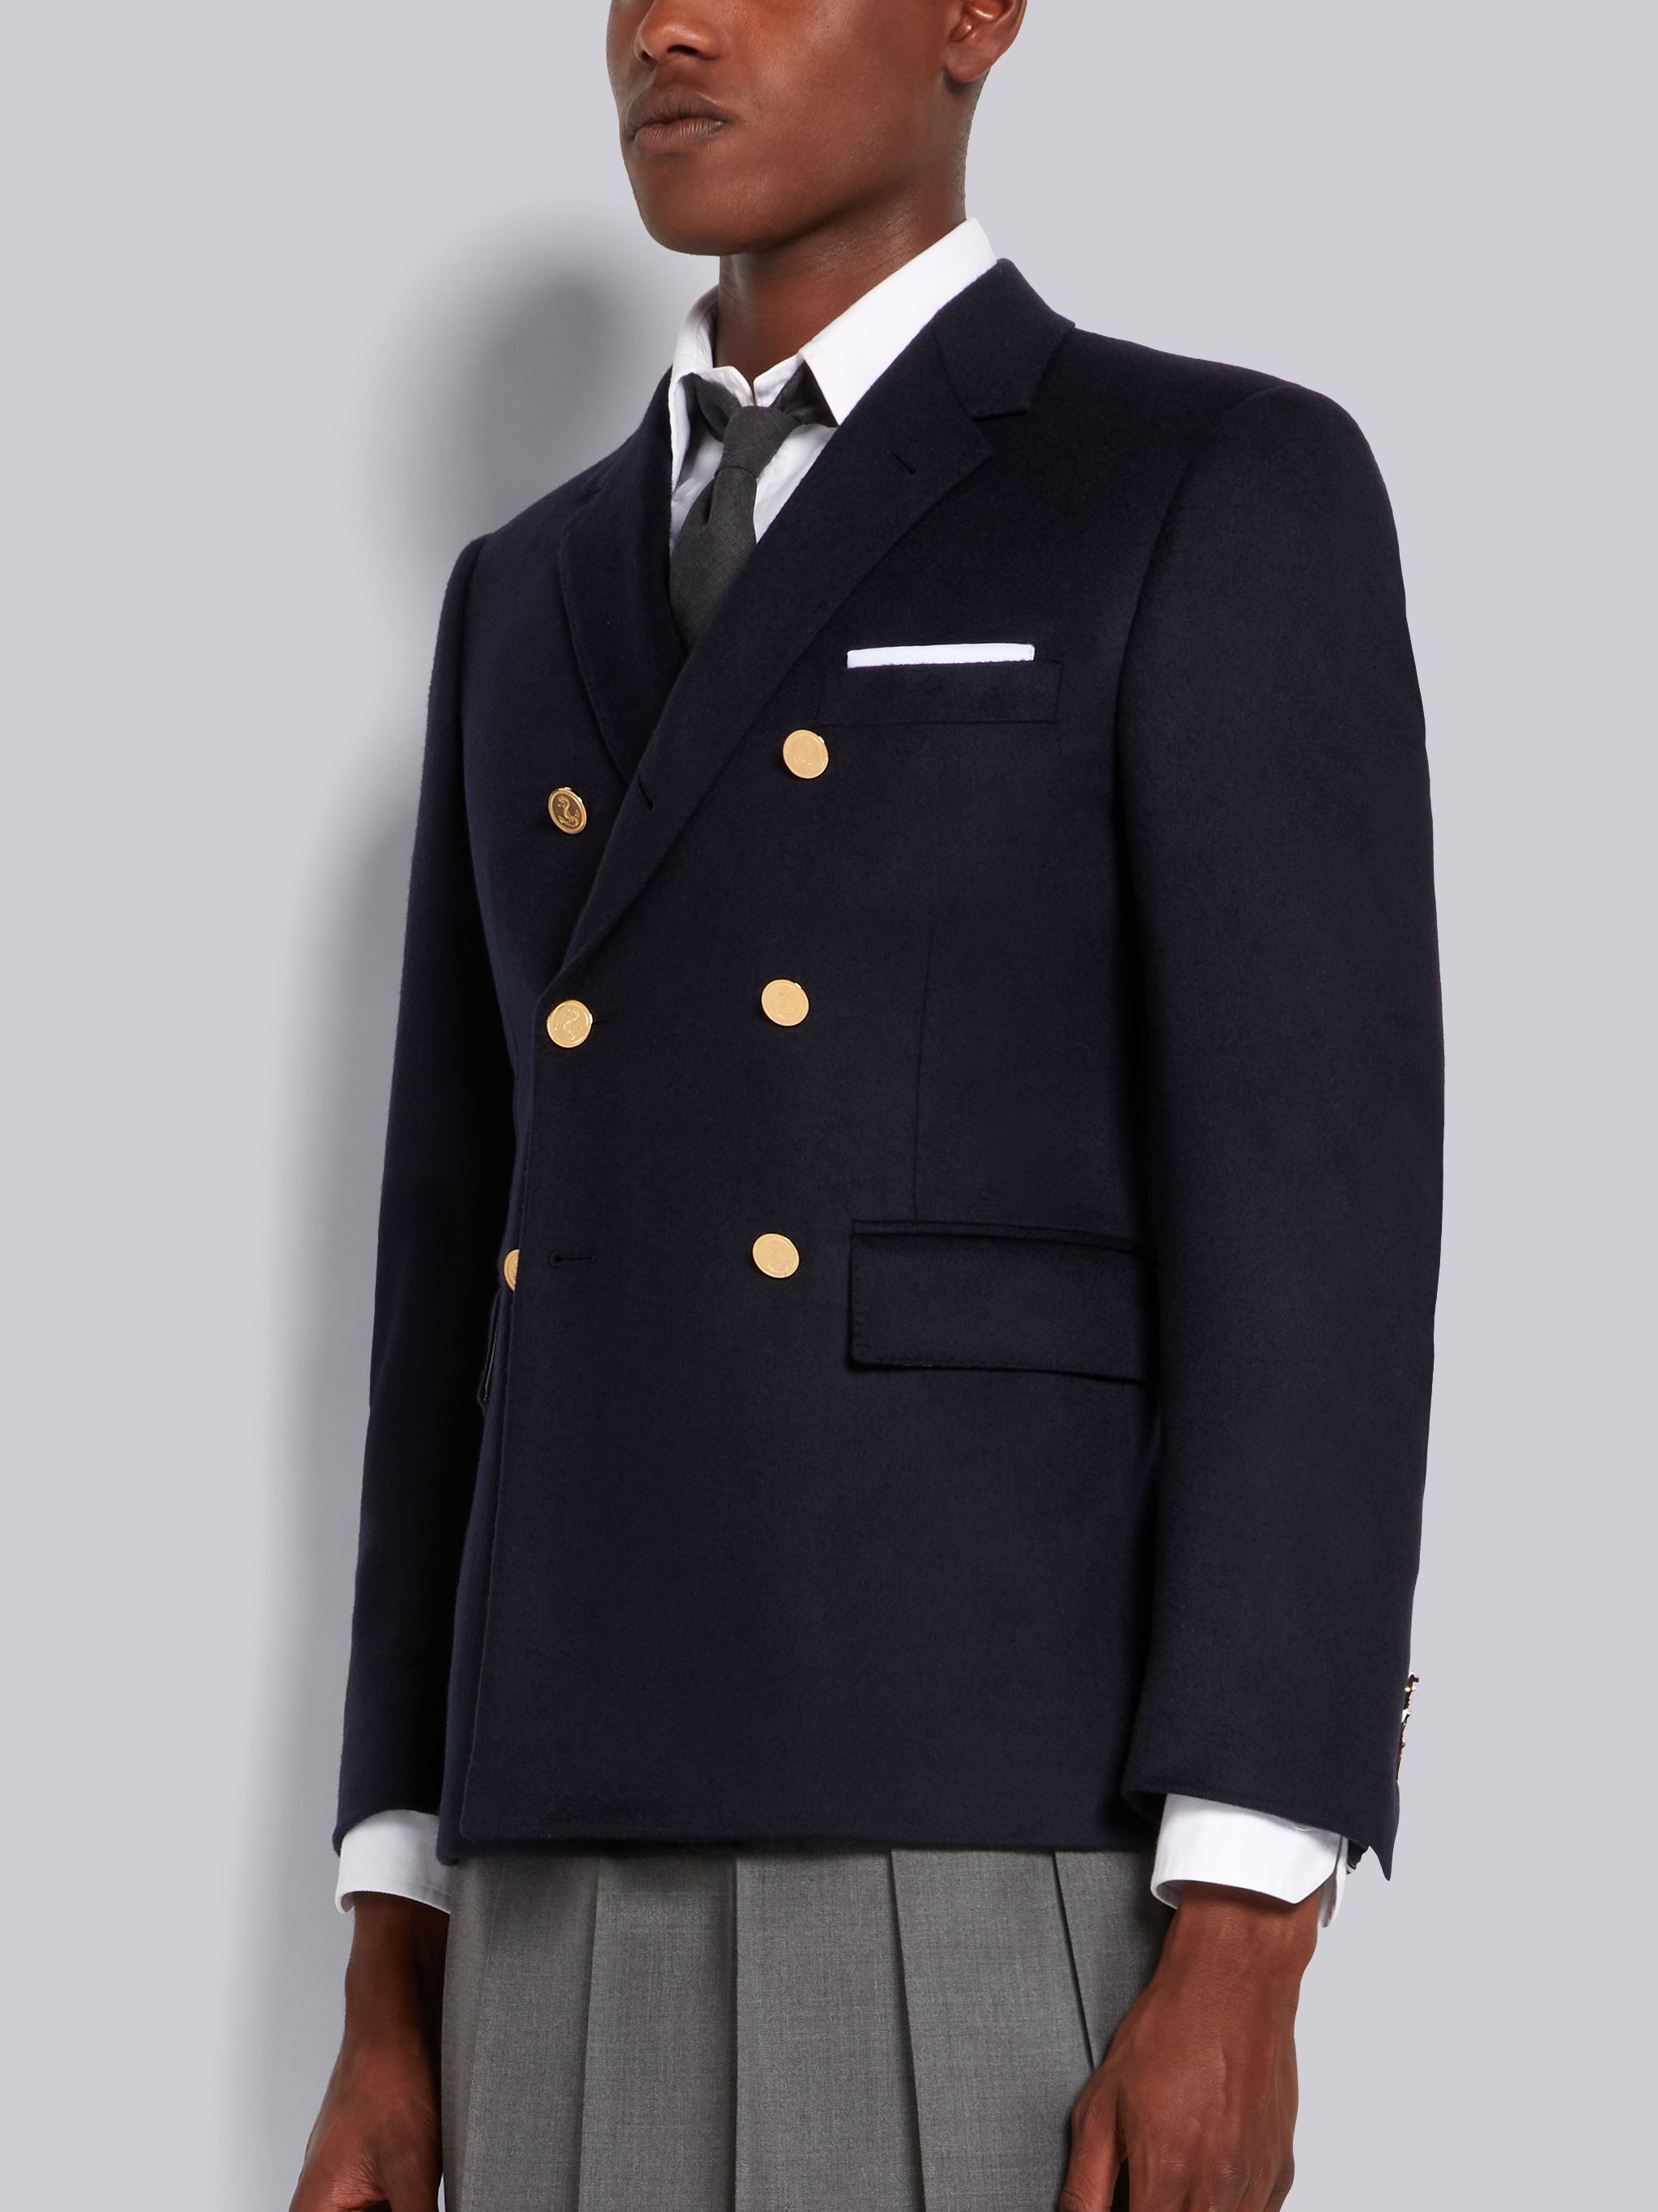 Thom Browne Navy Jacket Weight Cashmere Double Breasted Jacket 